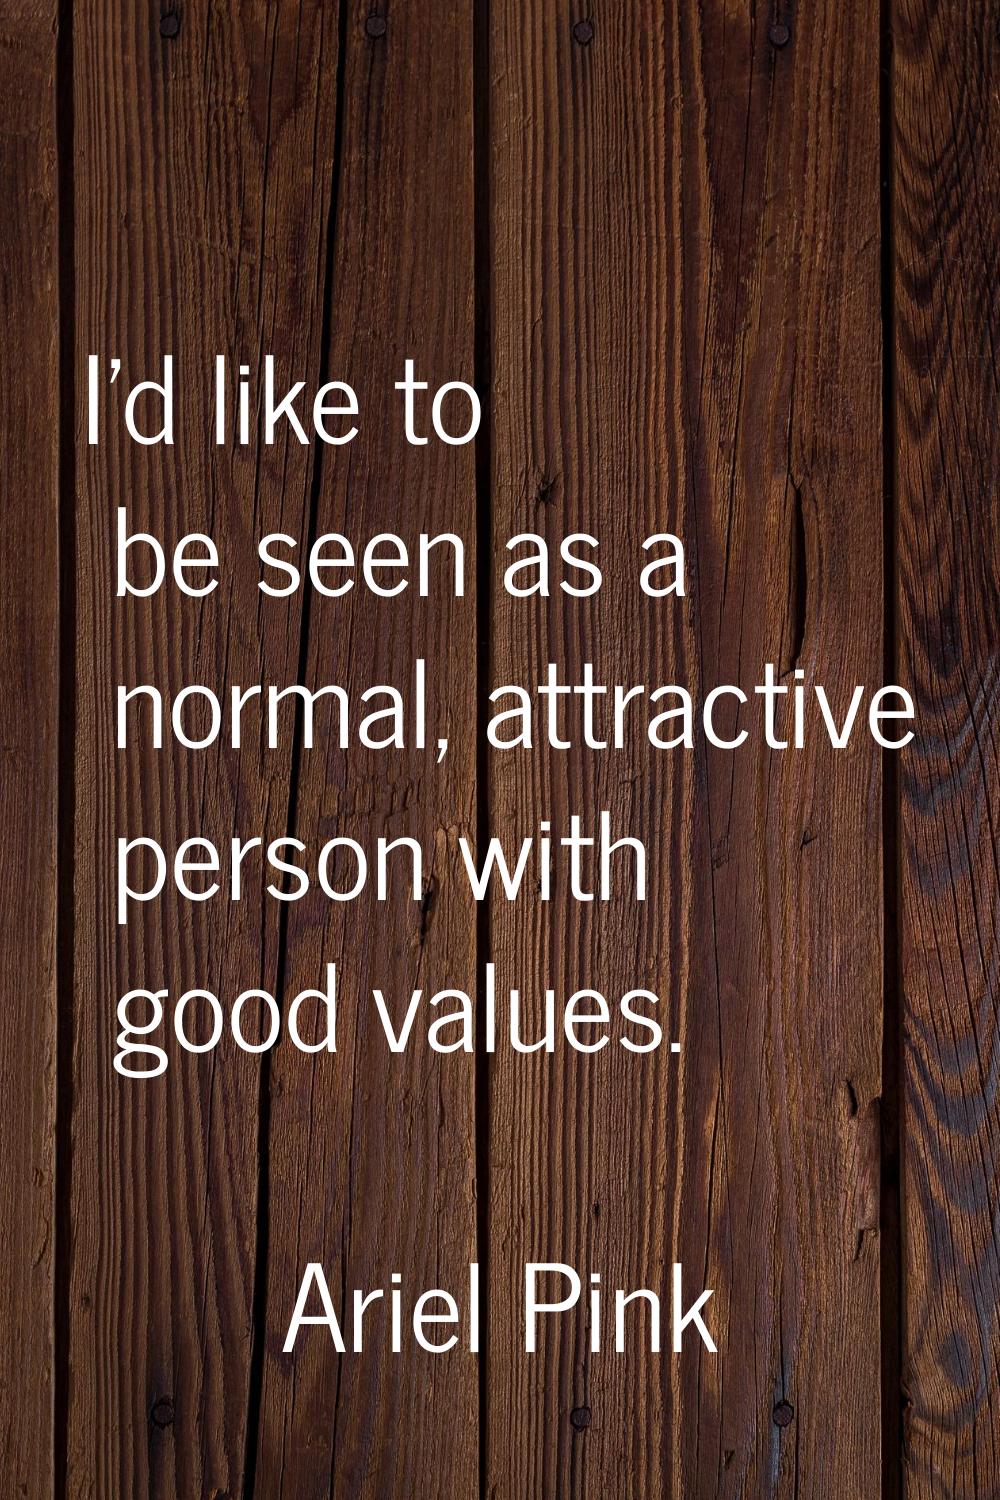 I'd like to be seen as a normal, attractive person with good values.